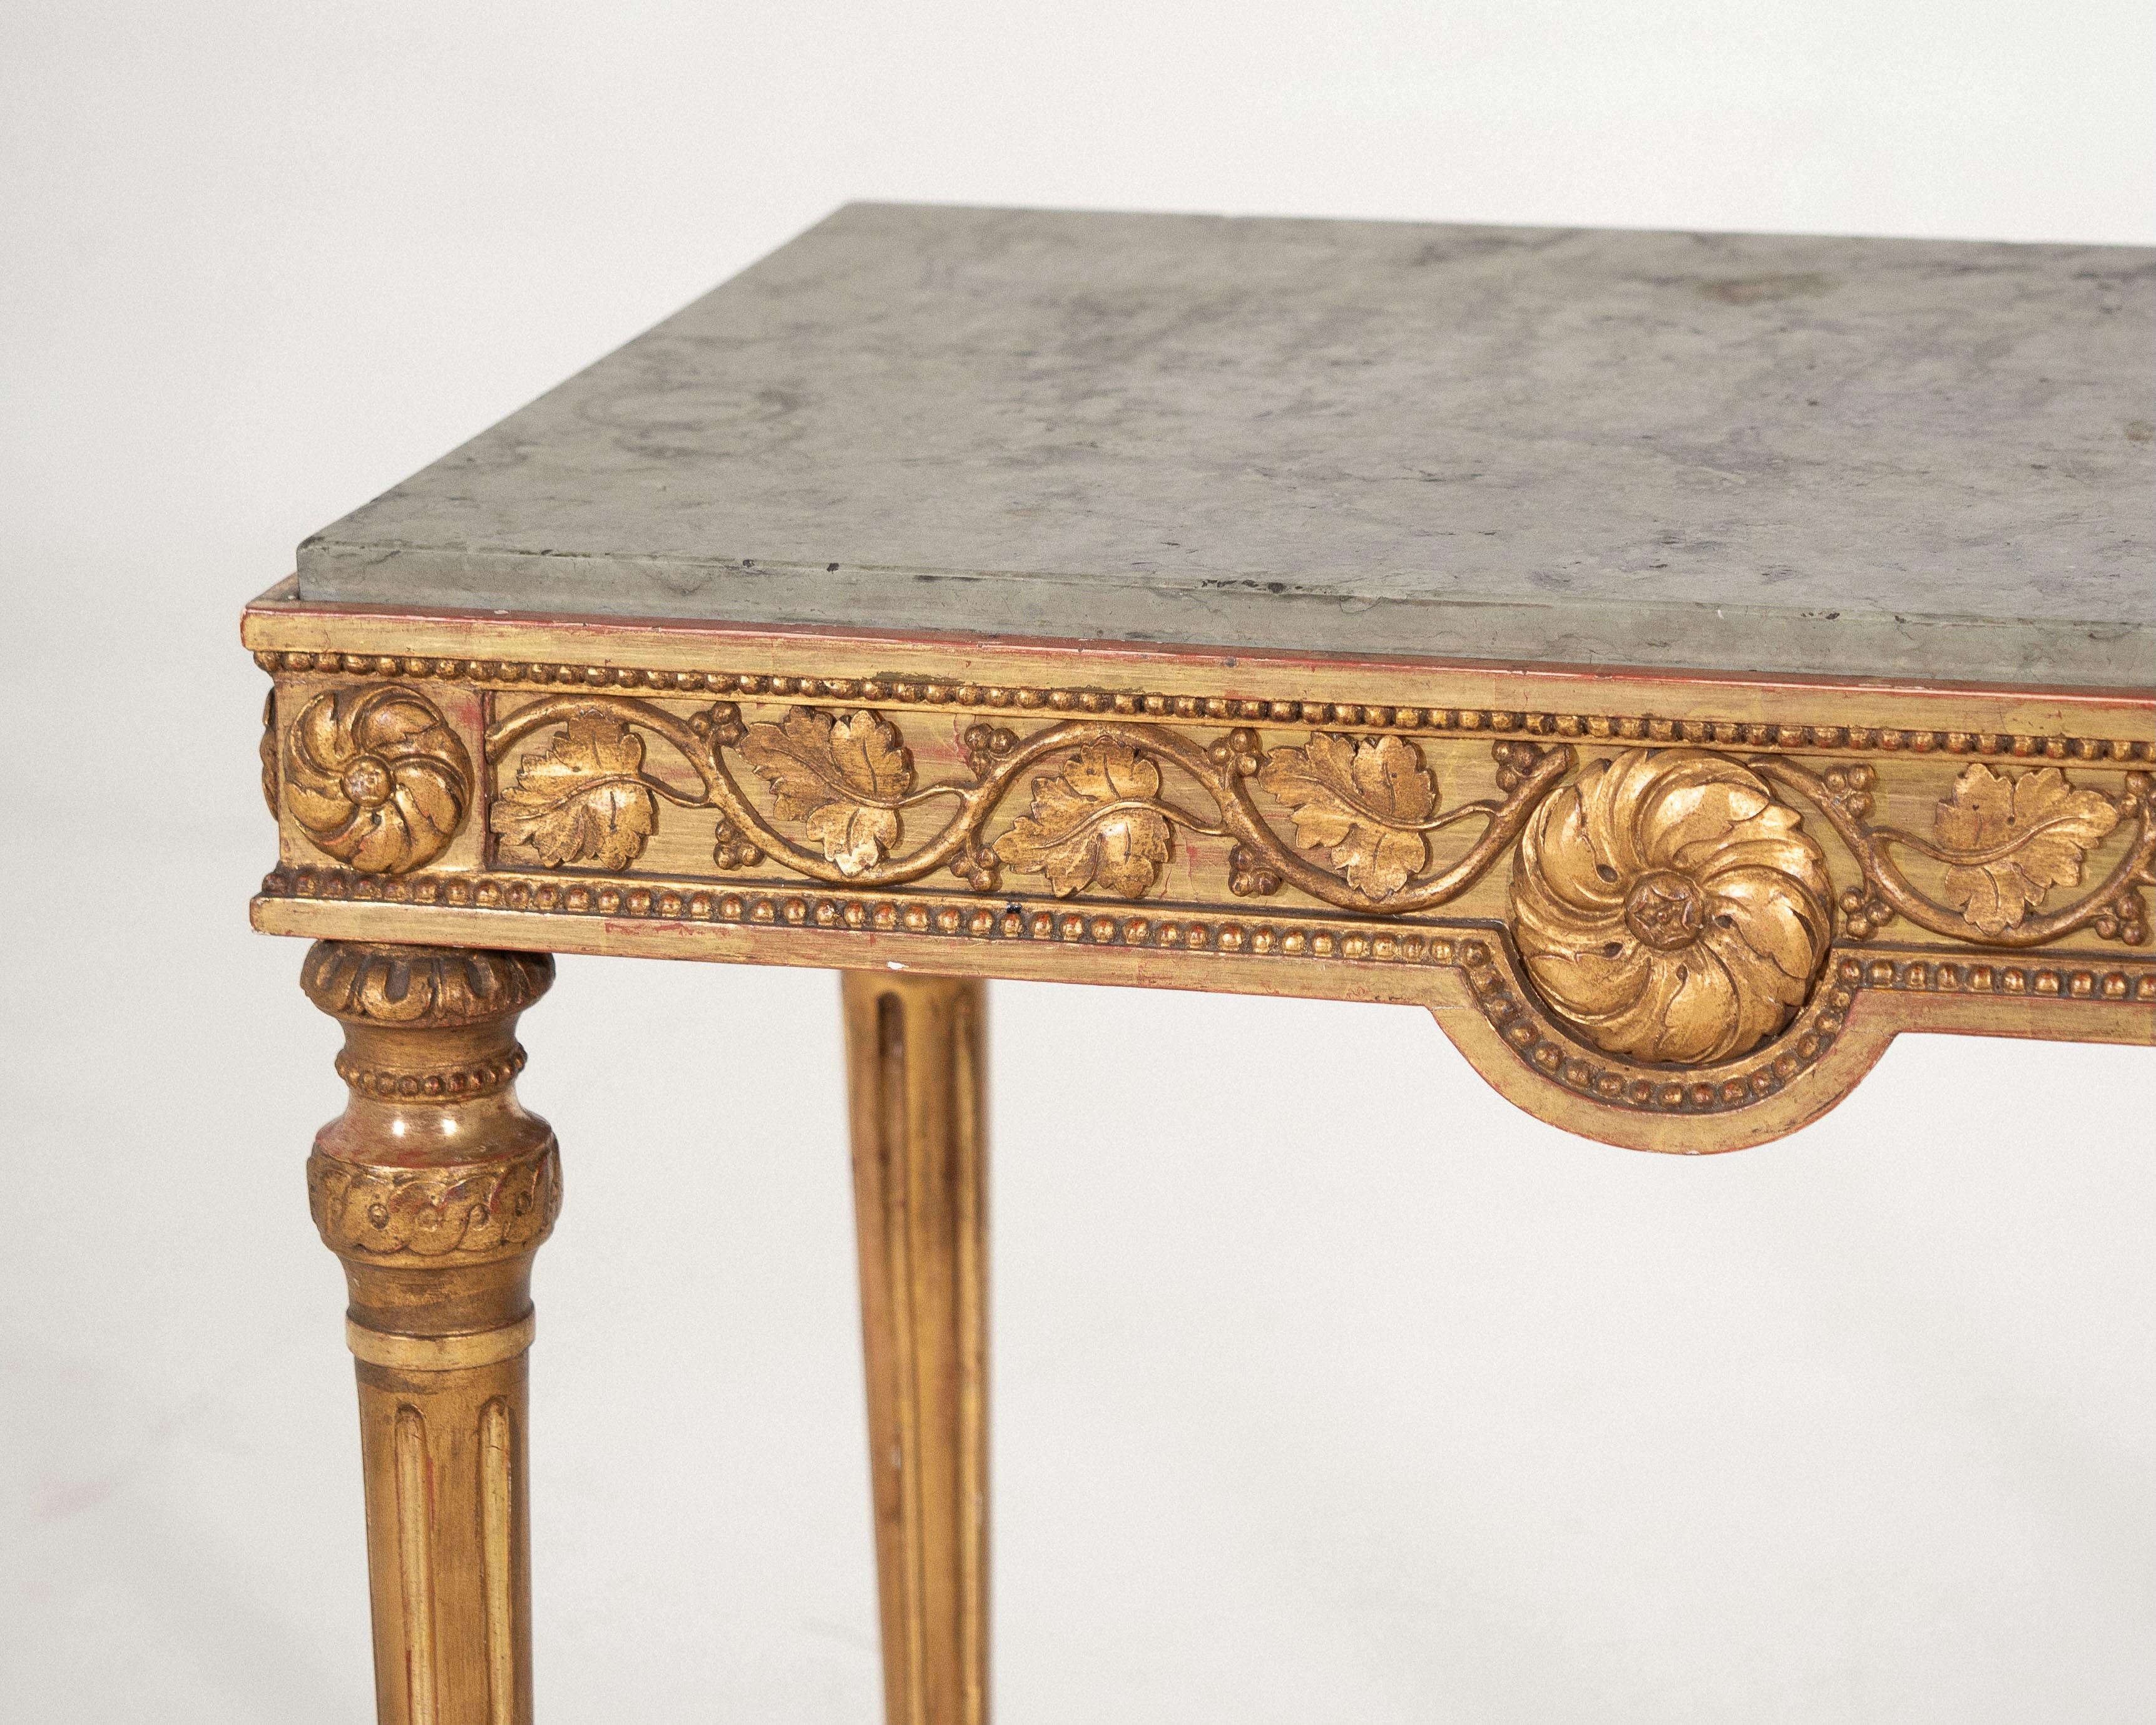 Freestanding Gustavian console table in original guilt with Gotland marble top and beautiful carvings, Stockholm work, 18th C.